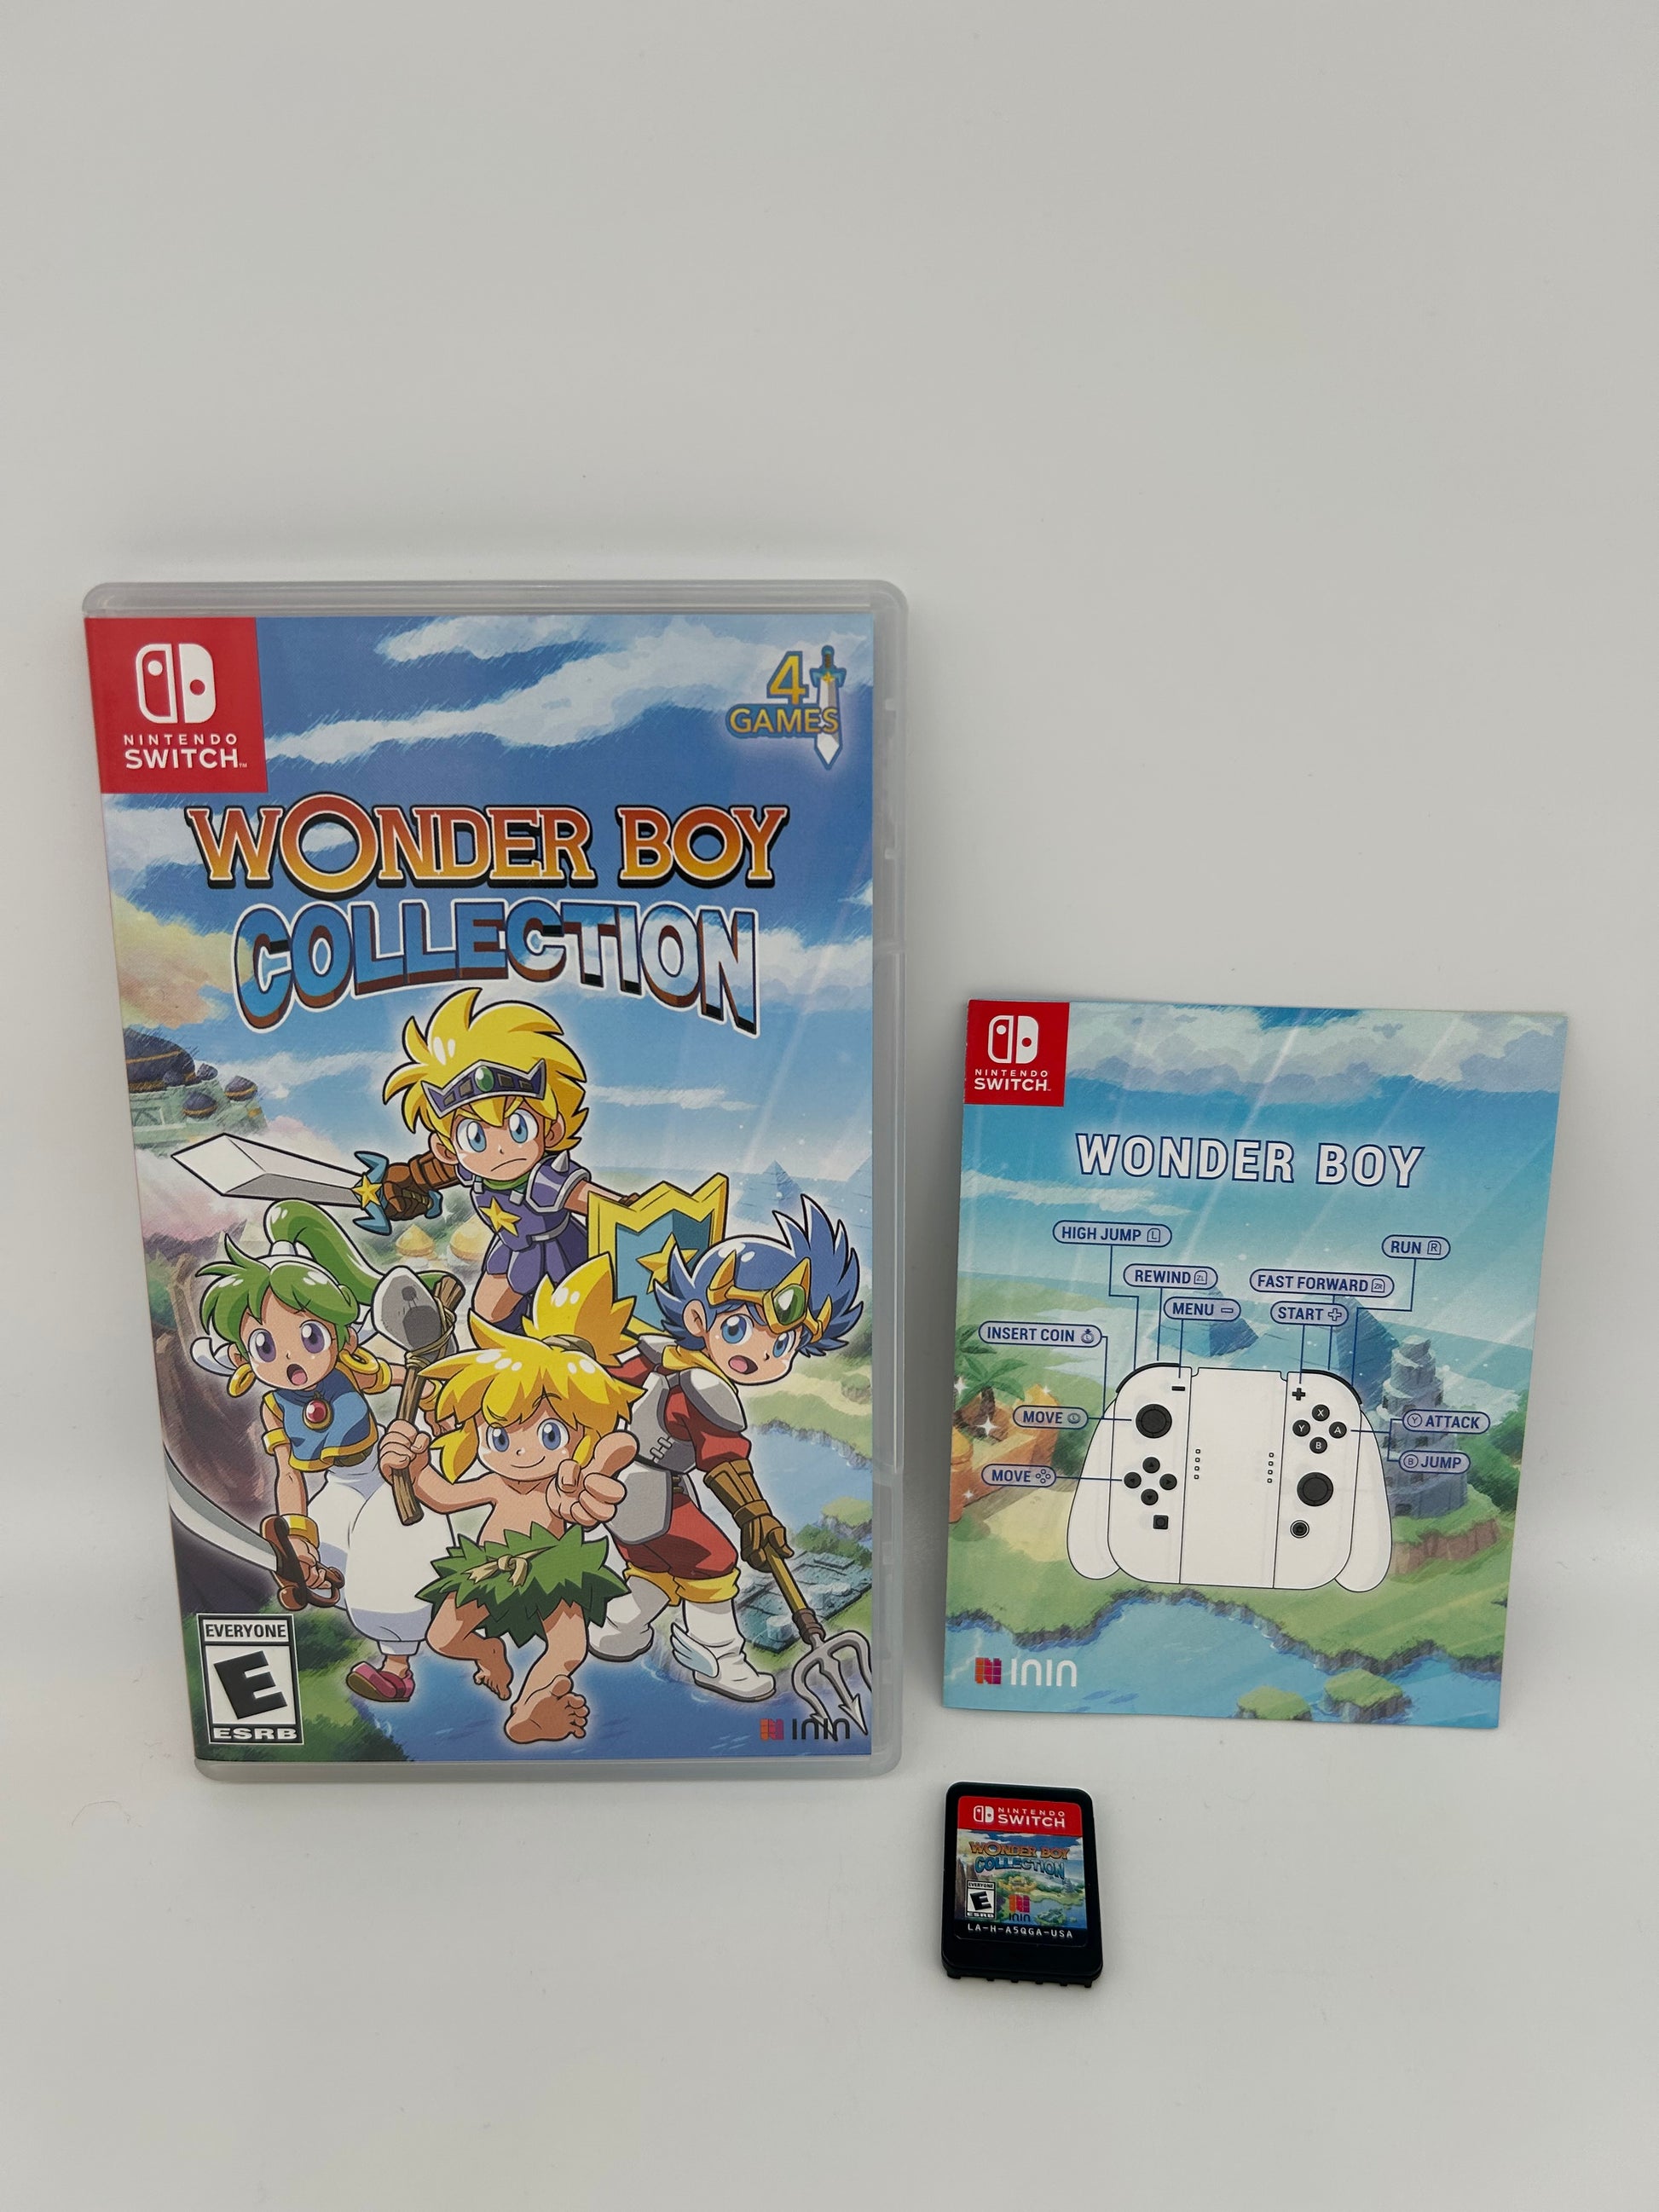 PiXEL-RETRO.COM : NINTENDO SWITCH COMPLETE IN BOX MANUAL GAME NTSC WONDER BOY COLLECTION